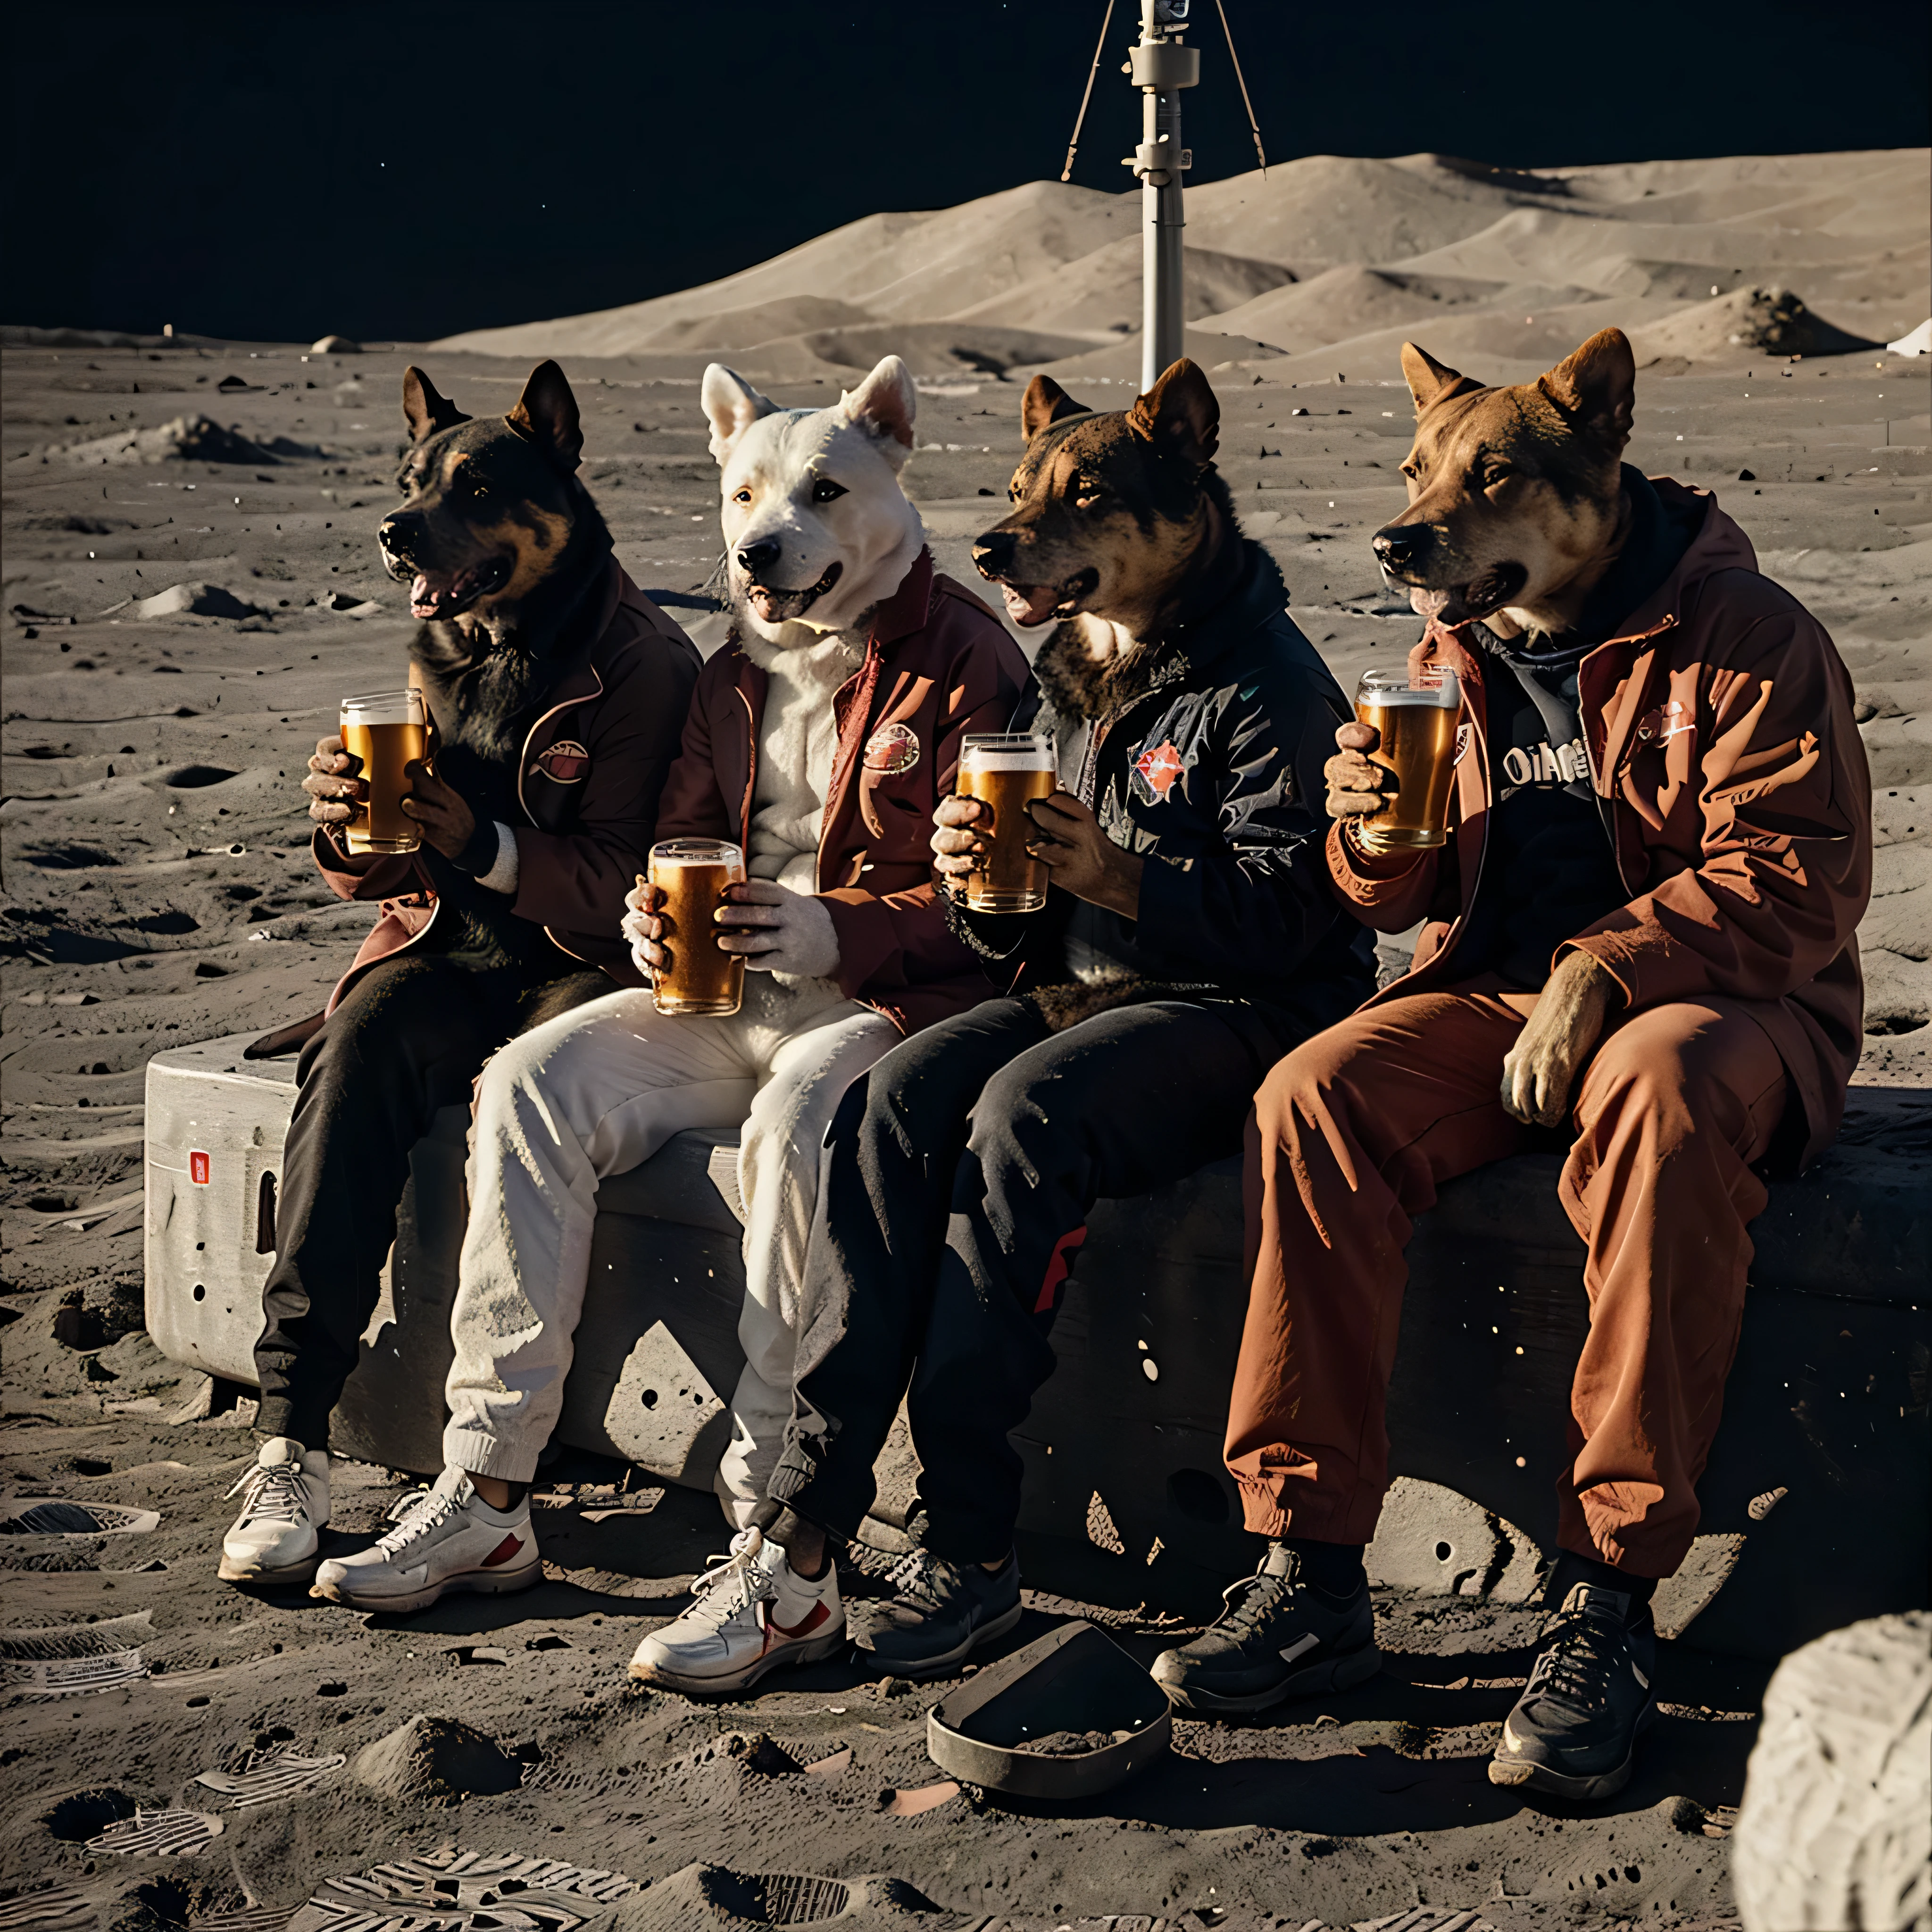 Communist dogs drinking beer on the moon.